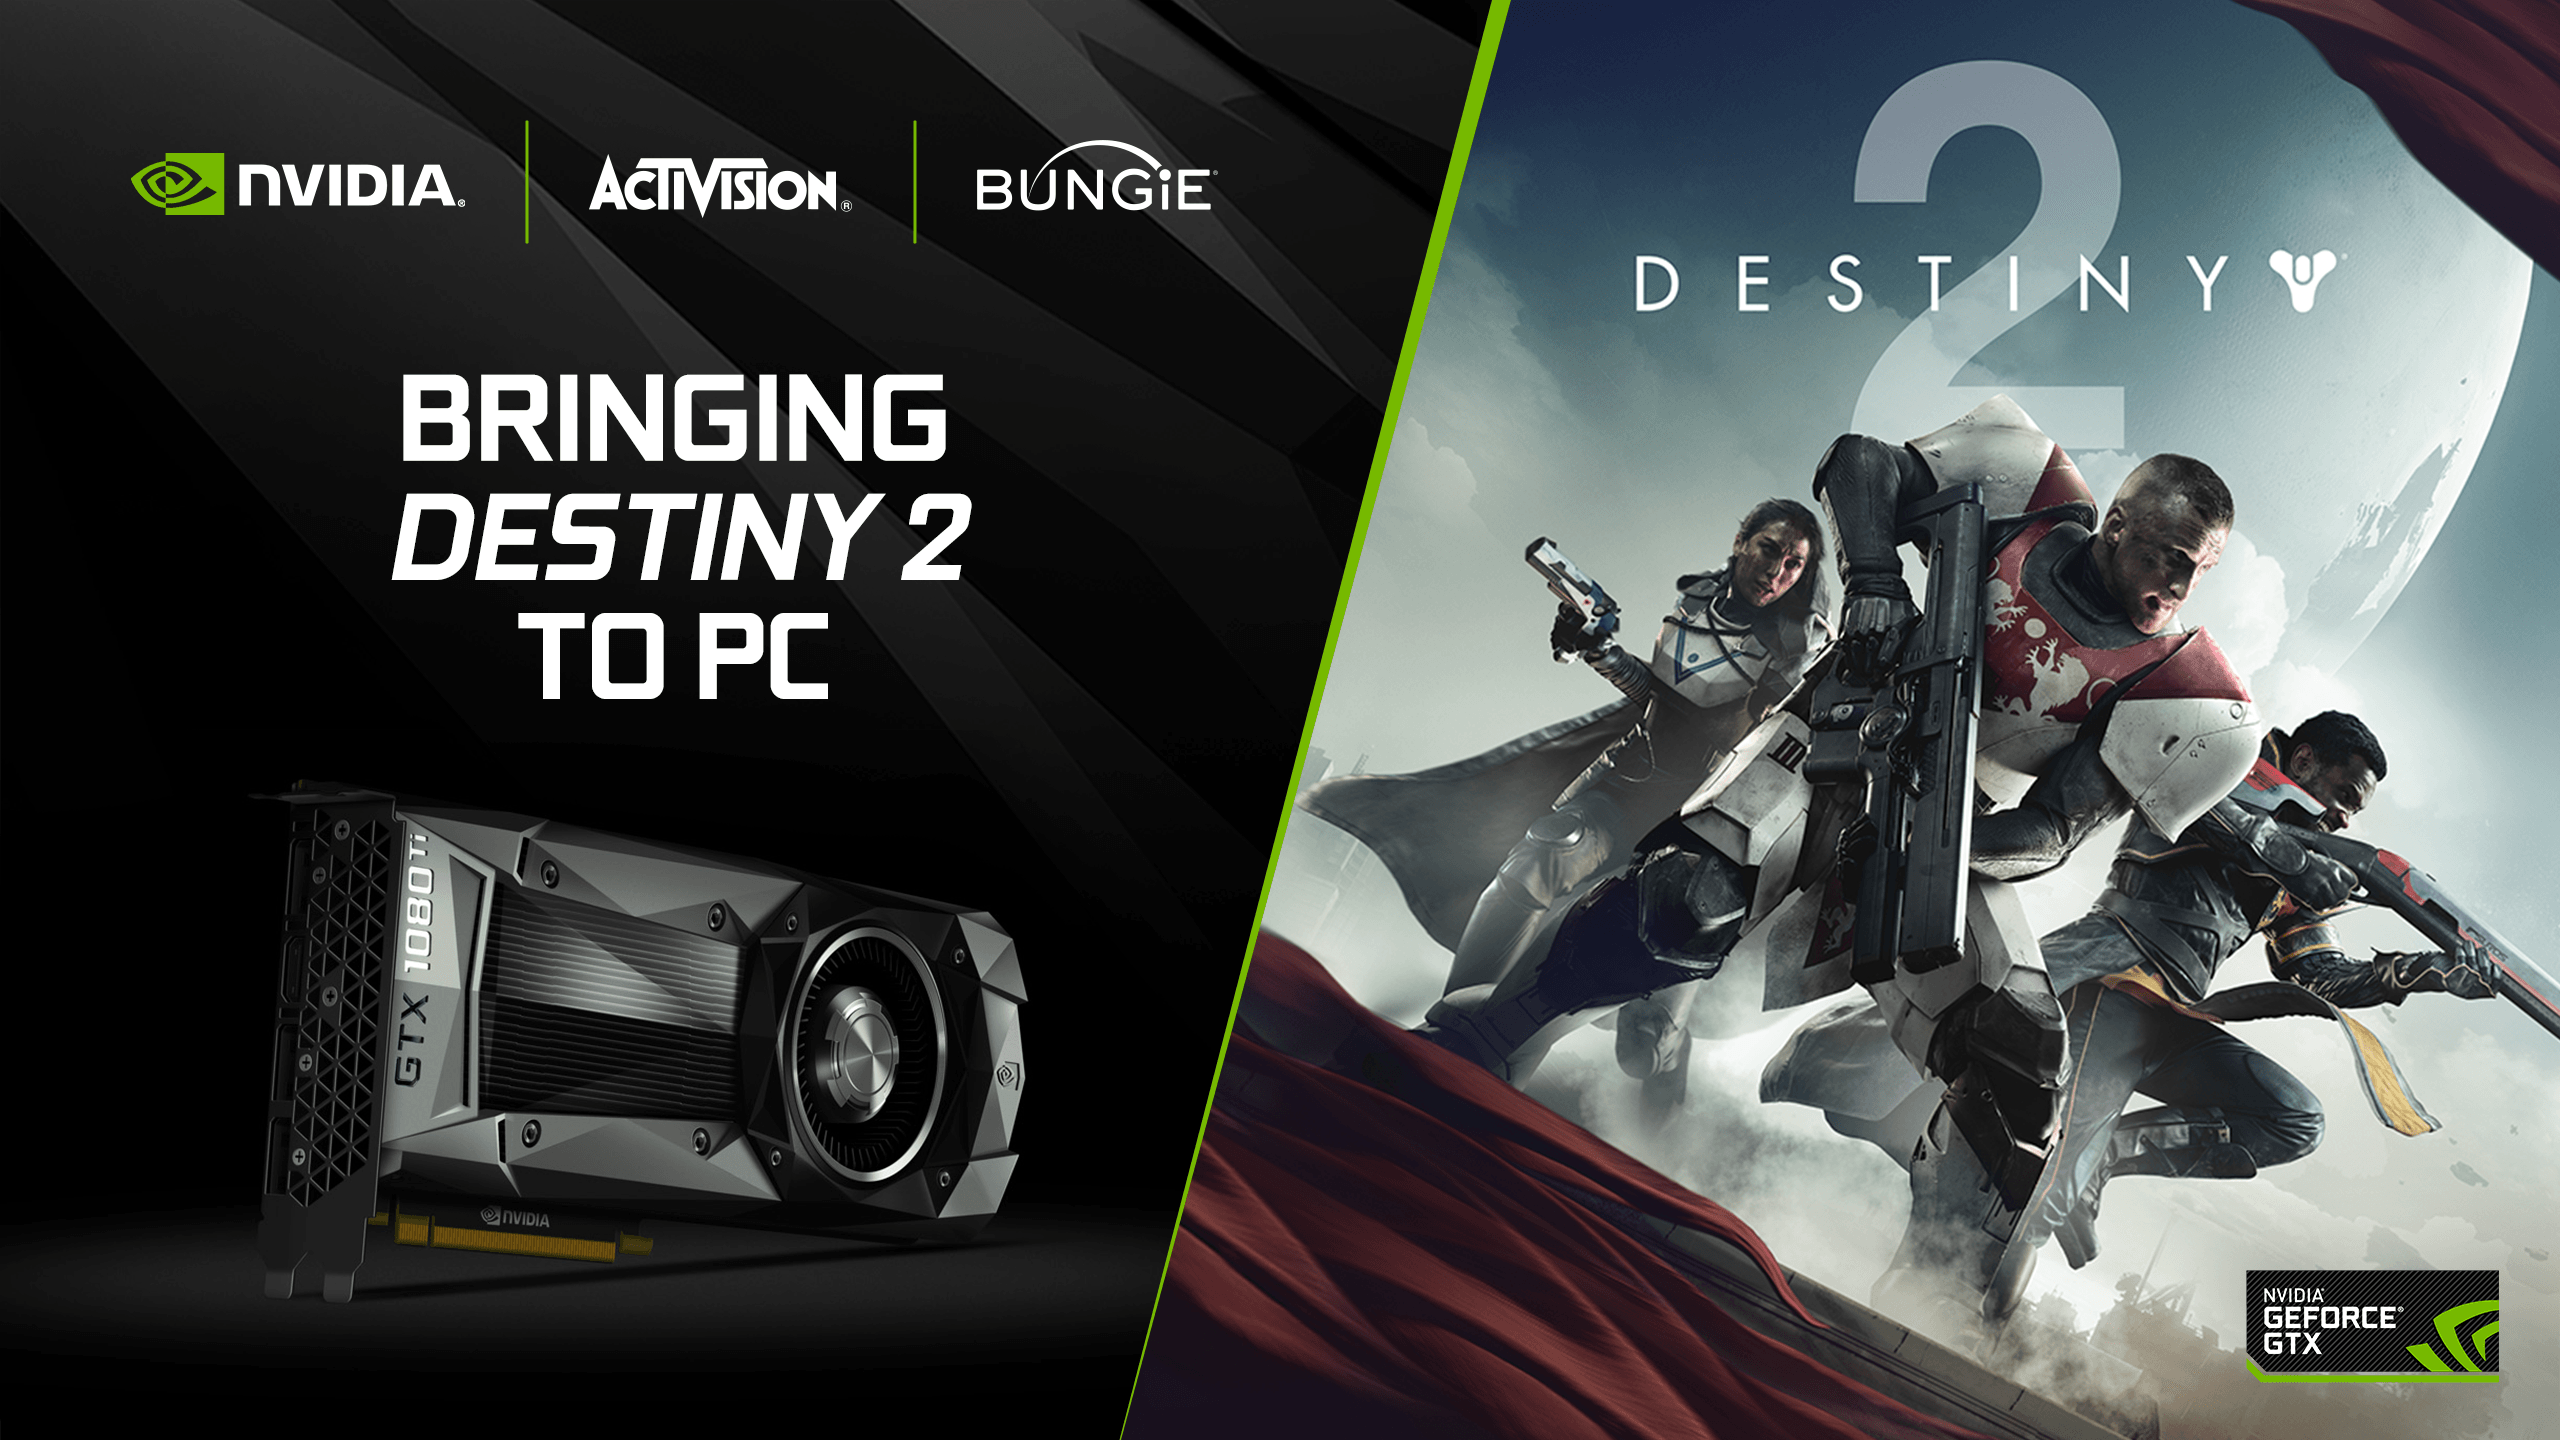 NVIDIA And Activision Continue Collaboration on Destiny 2 With New